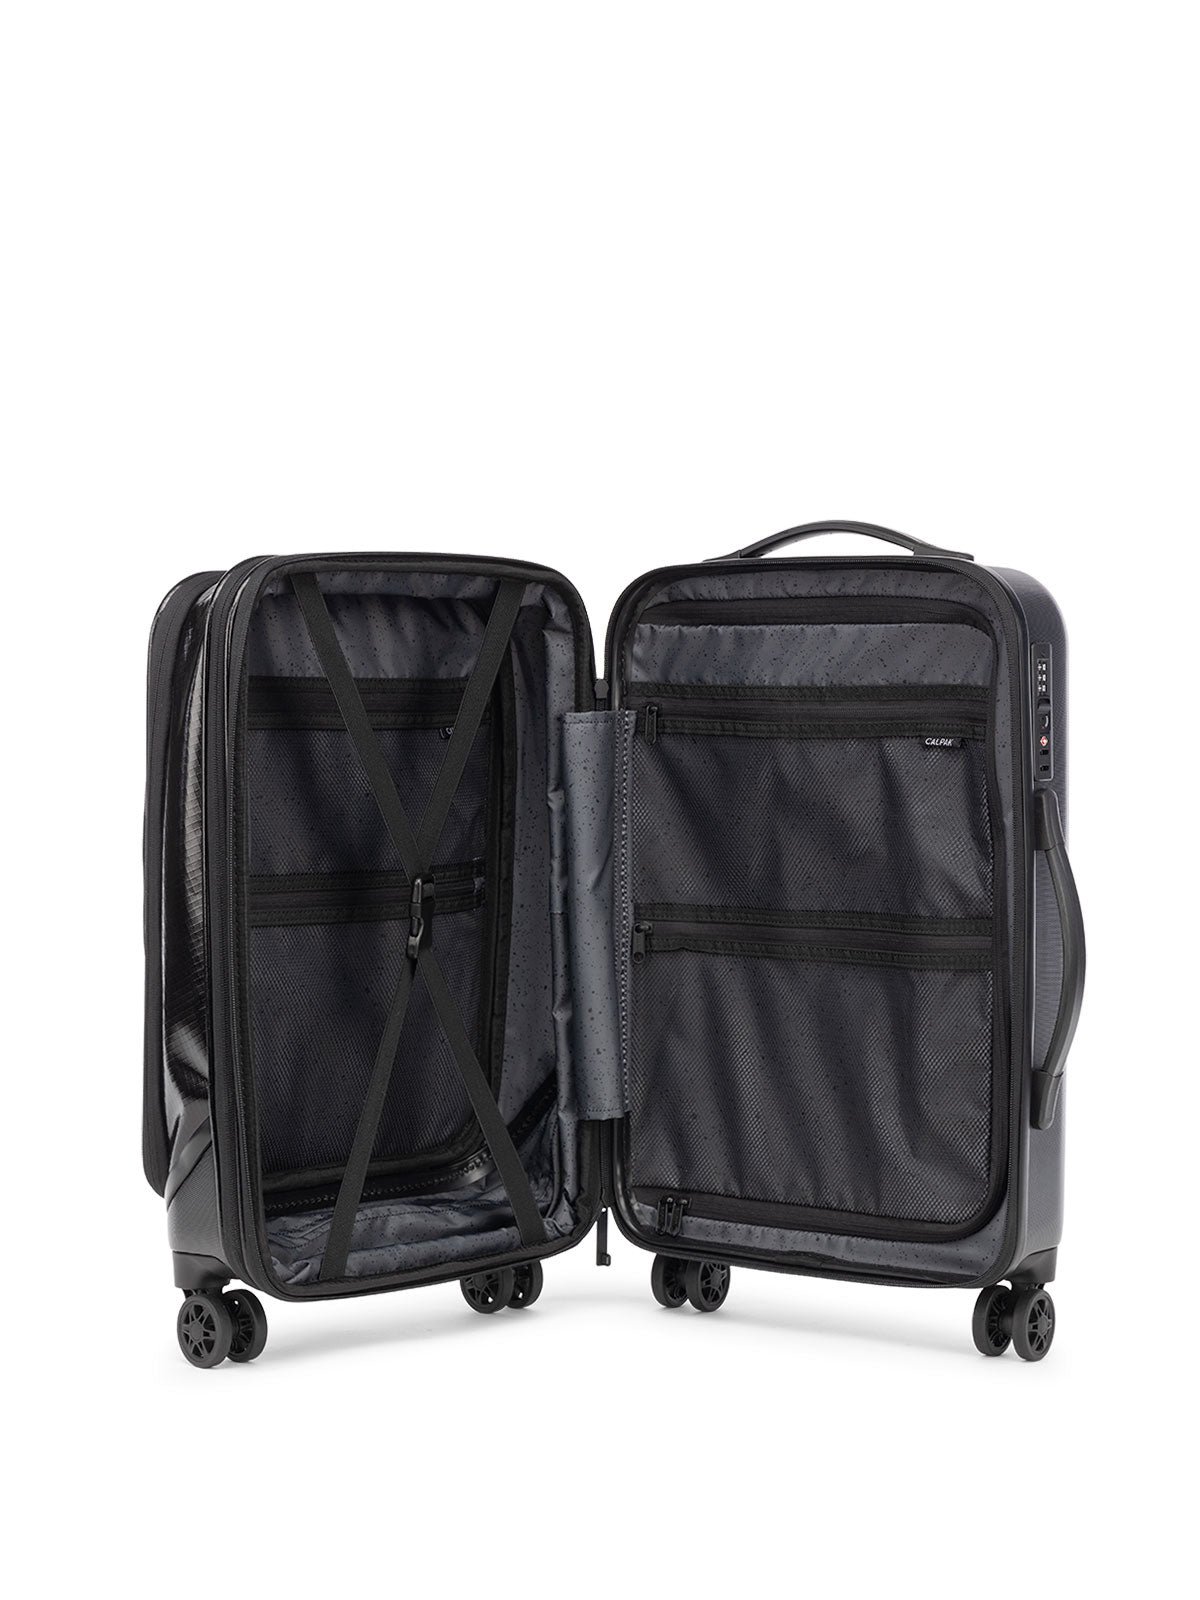 CALPAK Terra Carry-On Luggage interior with multiple zipped pockets and compression strap in obsidian